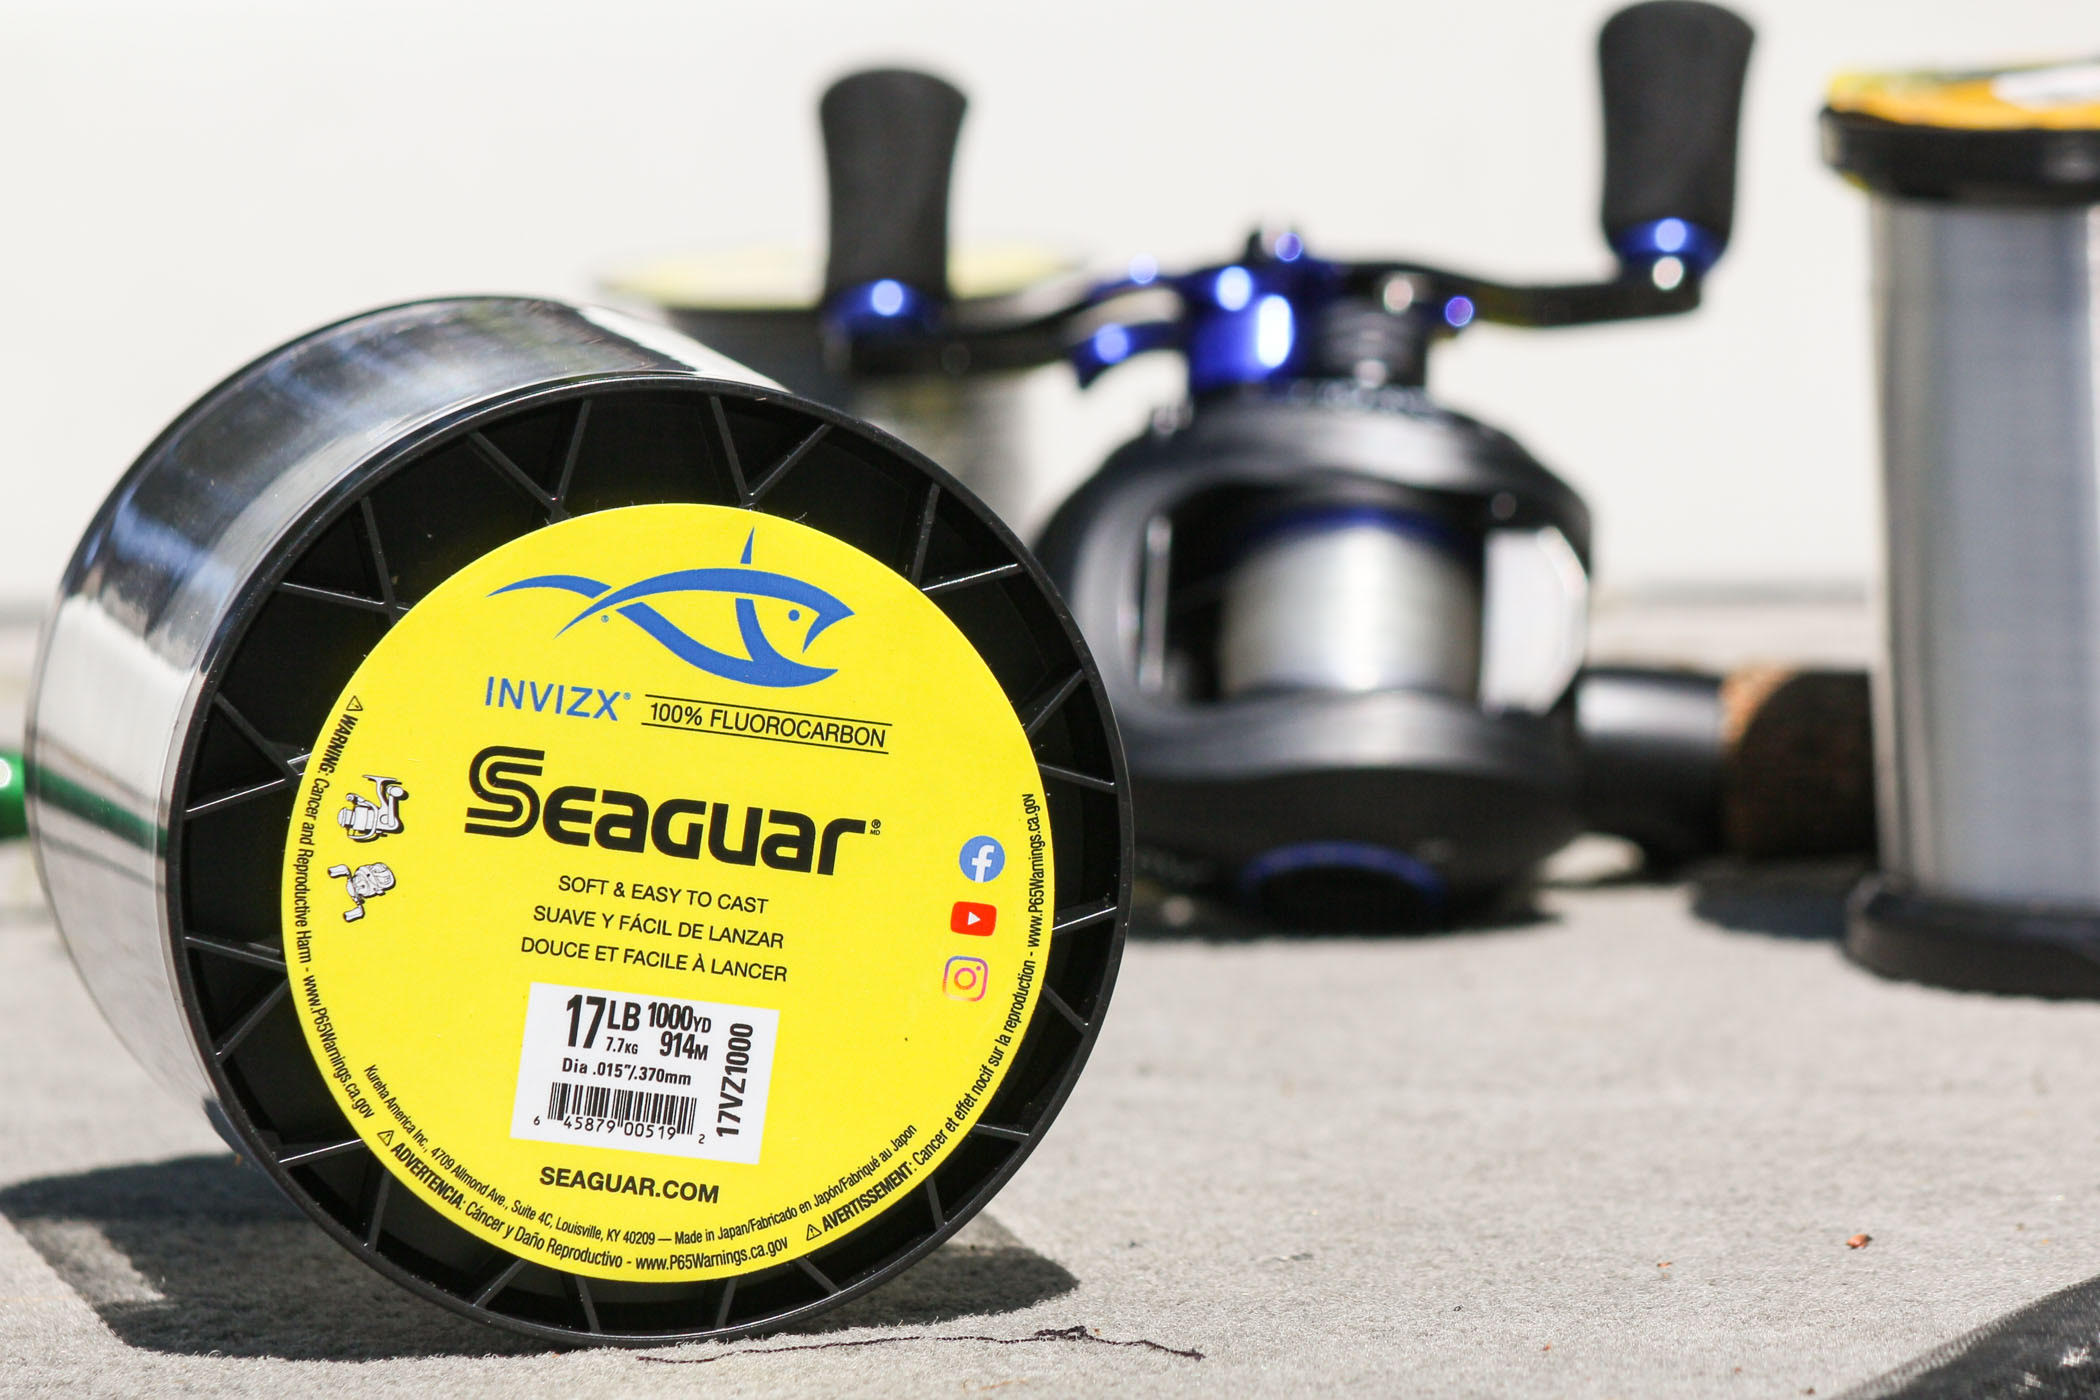 Seaguar InvizX Fluorocarbon Review - Wired2Fish